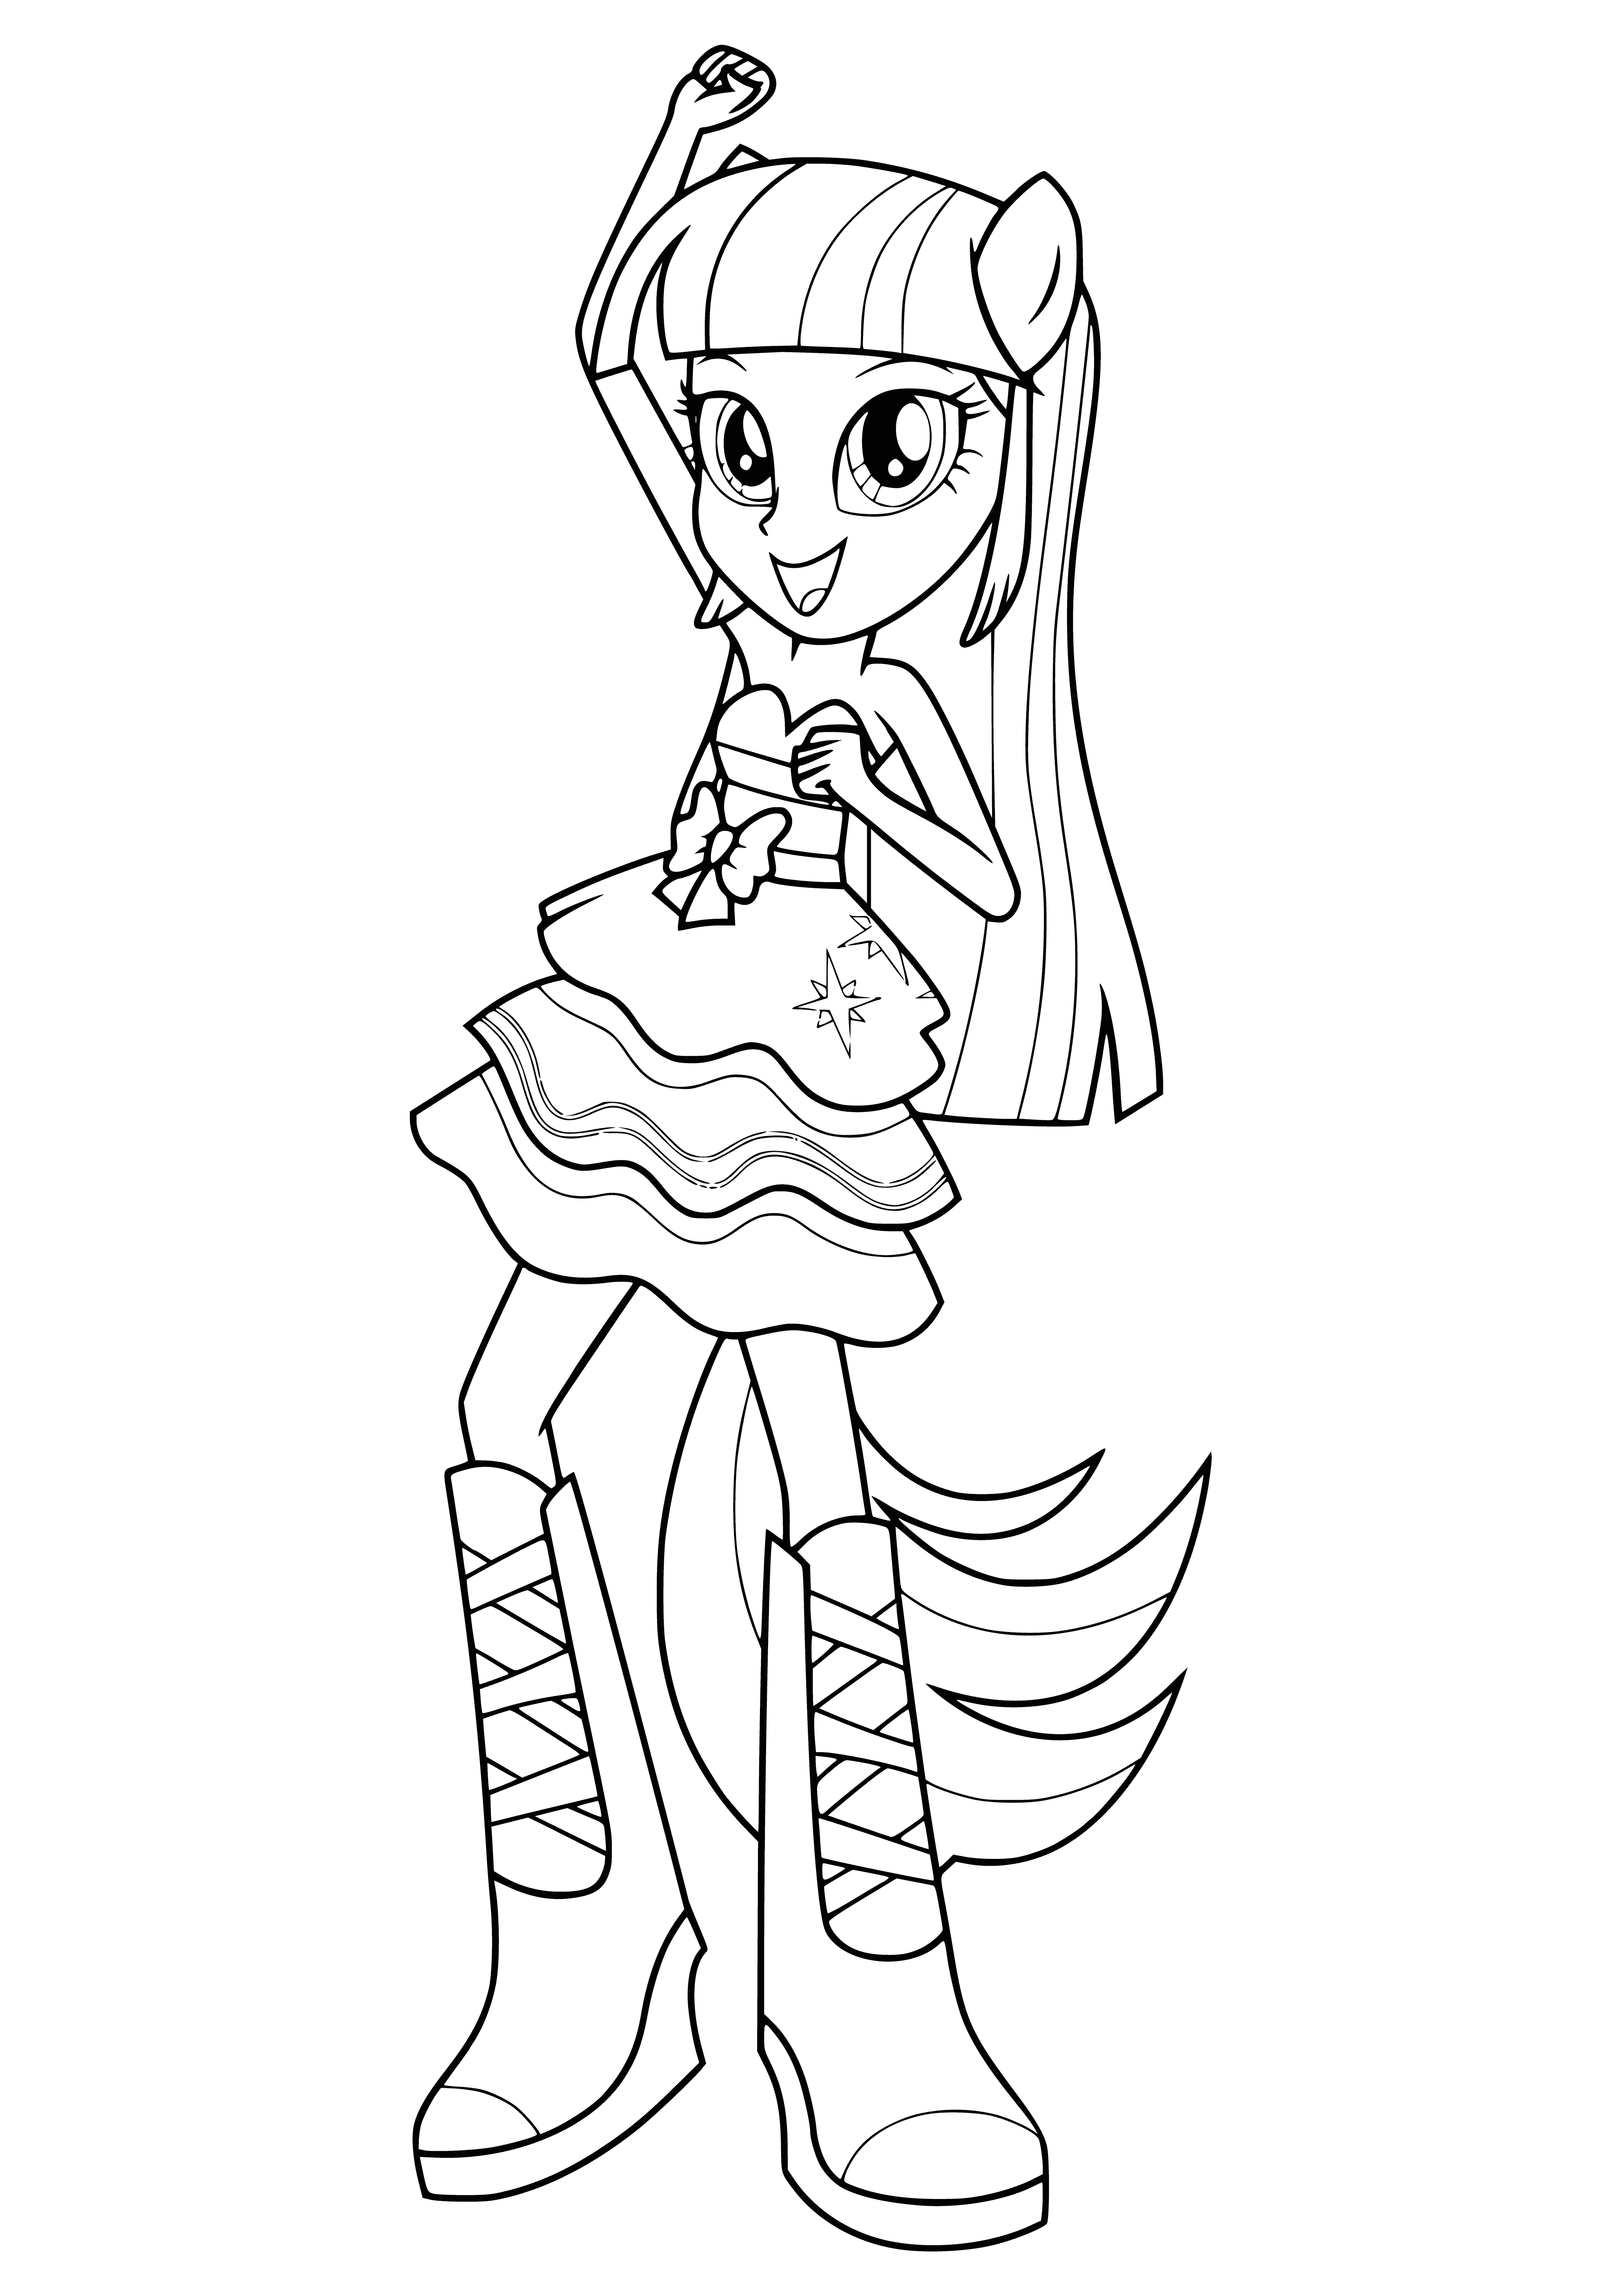 coloring page: Smart and courageous high schooler who looks out for her friends and is devoted to doing the right thing. #EquestriaGirls #FriendshipIsMagic